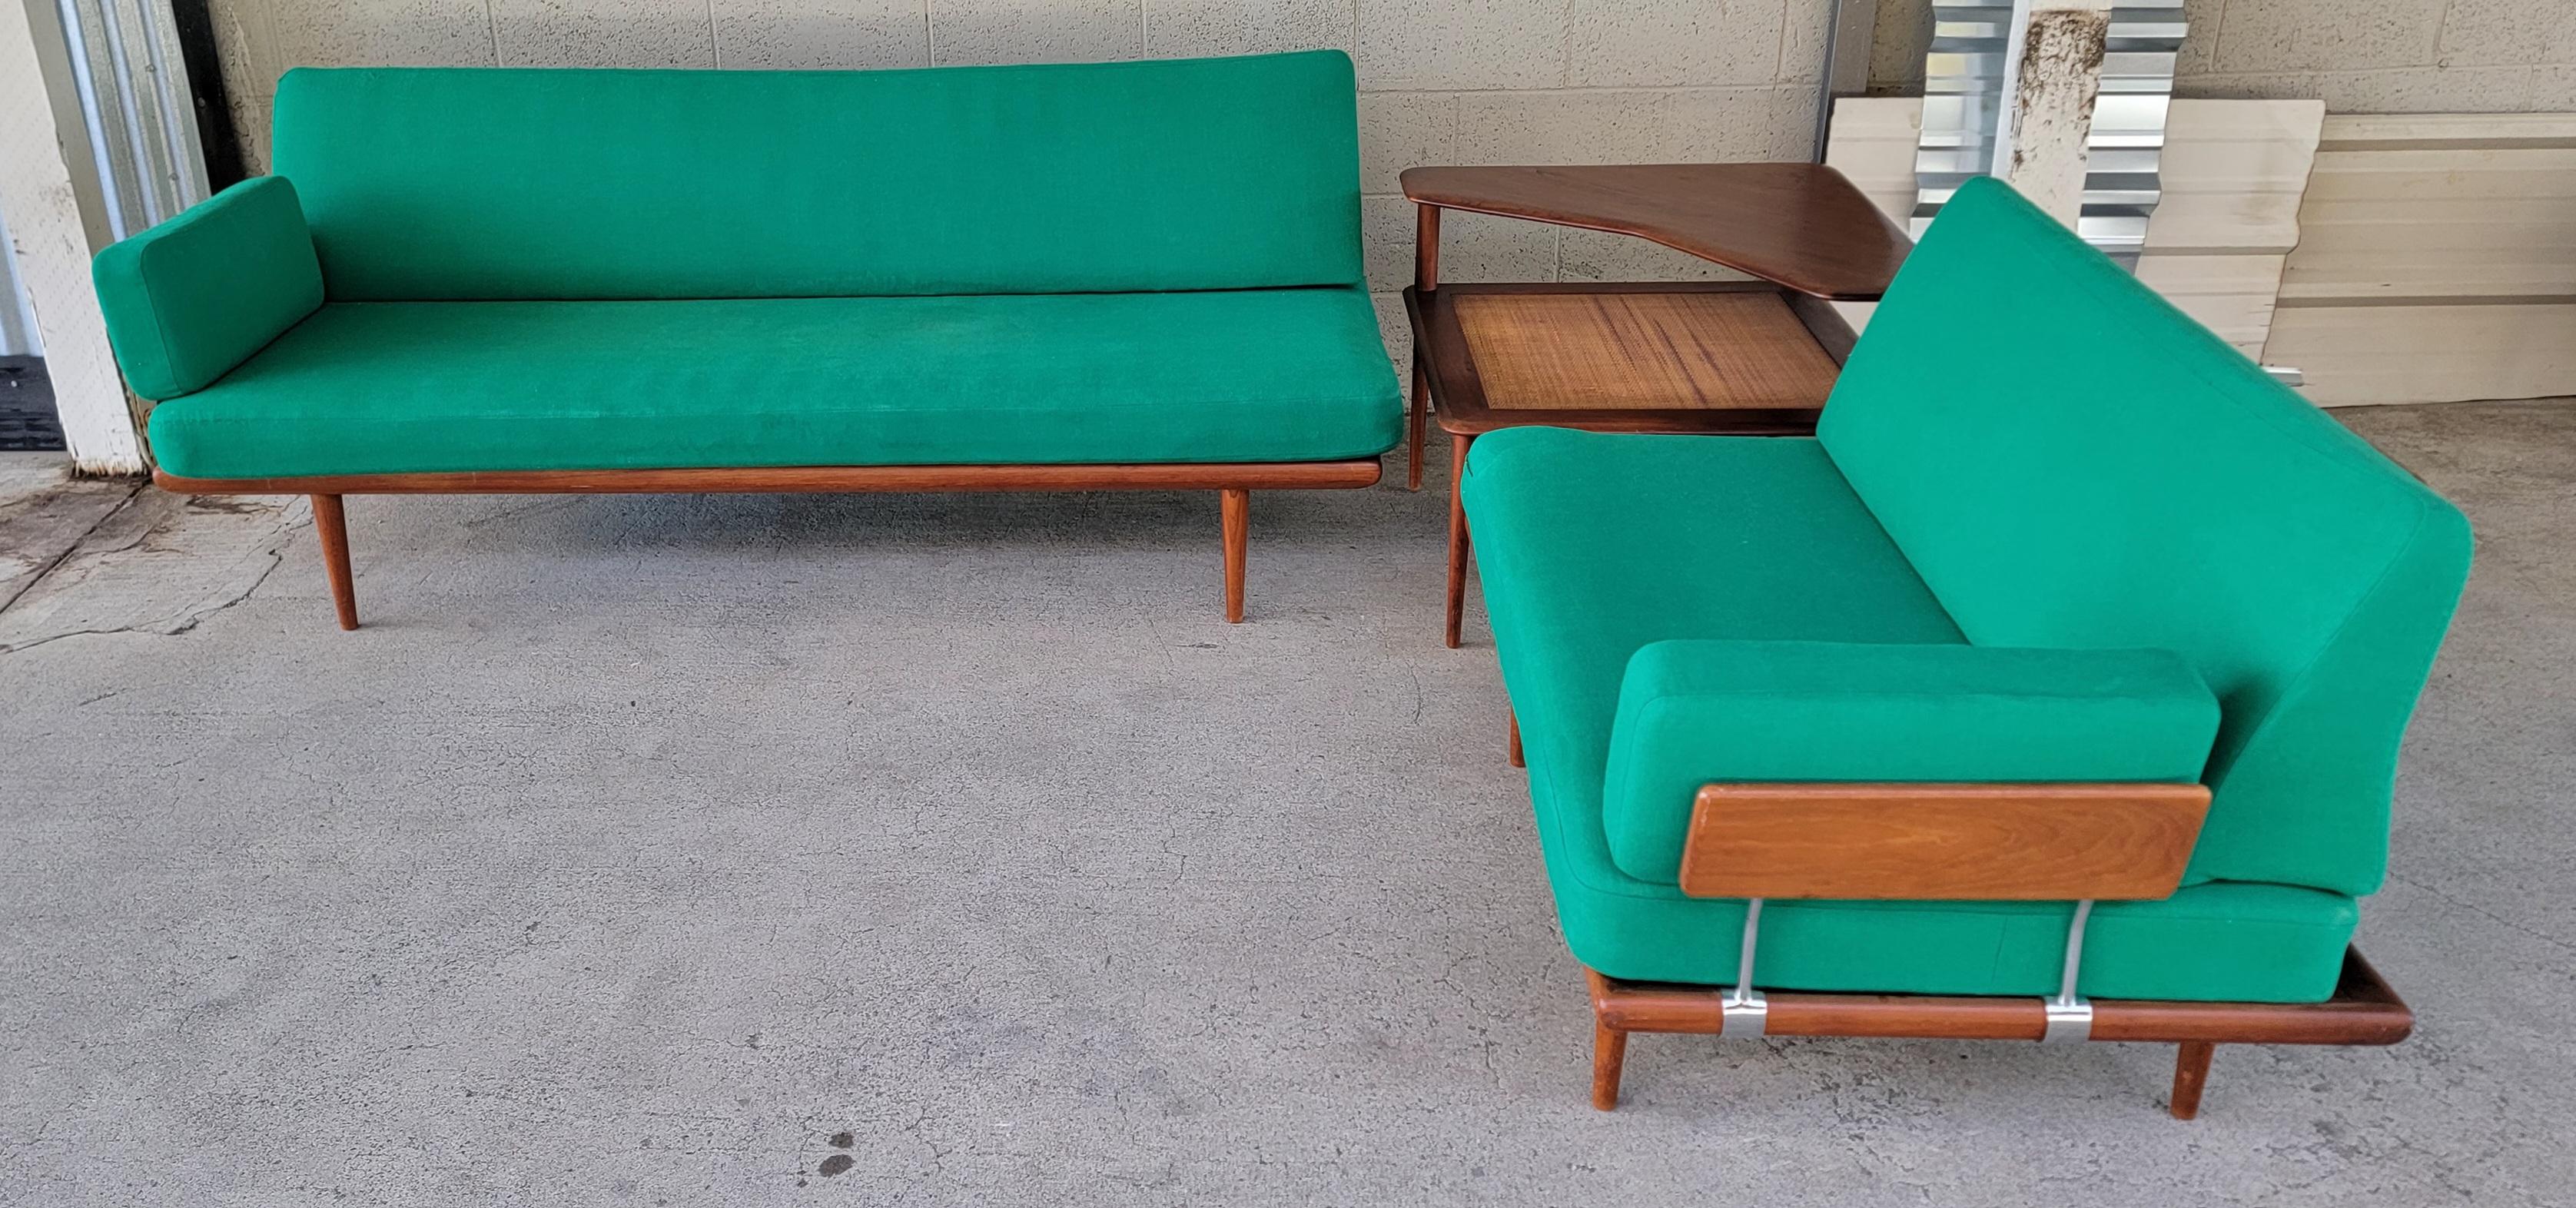 A 3 piece teak Danish Modern sectional sofa set consisting of two sofas and a corner table. Designed by Peter Hvidt & Orla Mølgaard-Nielsen for France and Son. Denmark, circa. 1950's. All pieces crafted in solid teak. Very good original condition